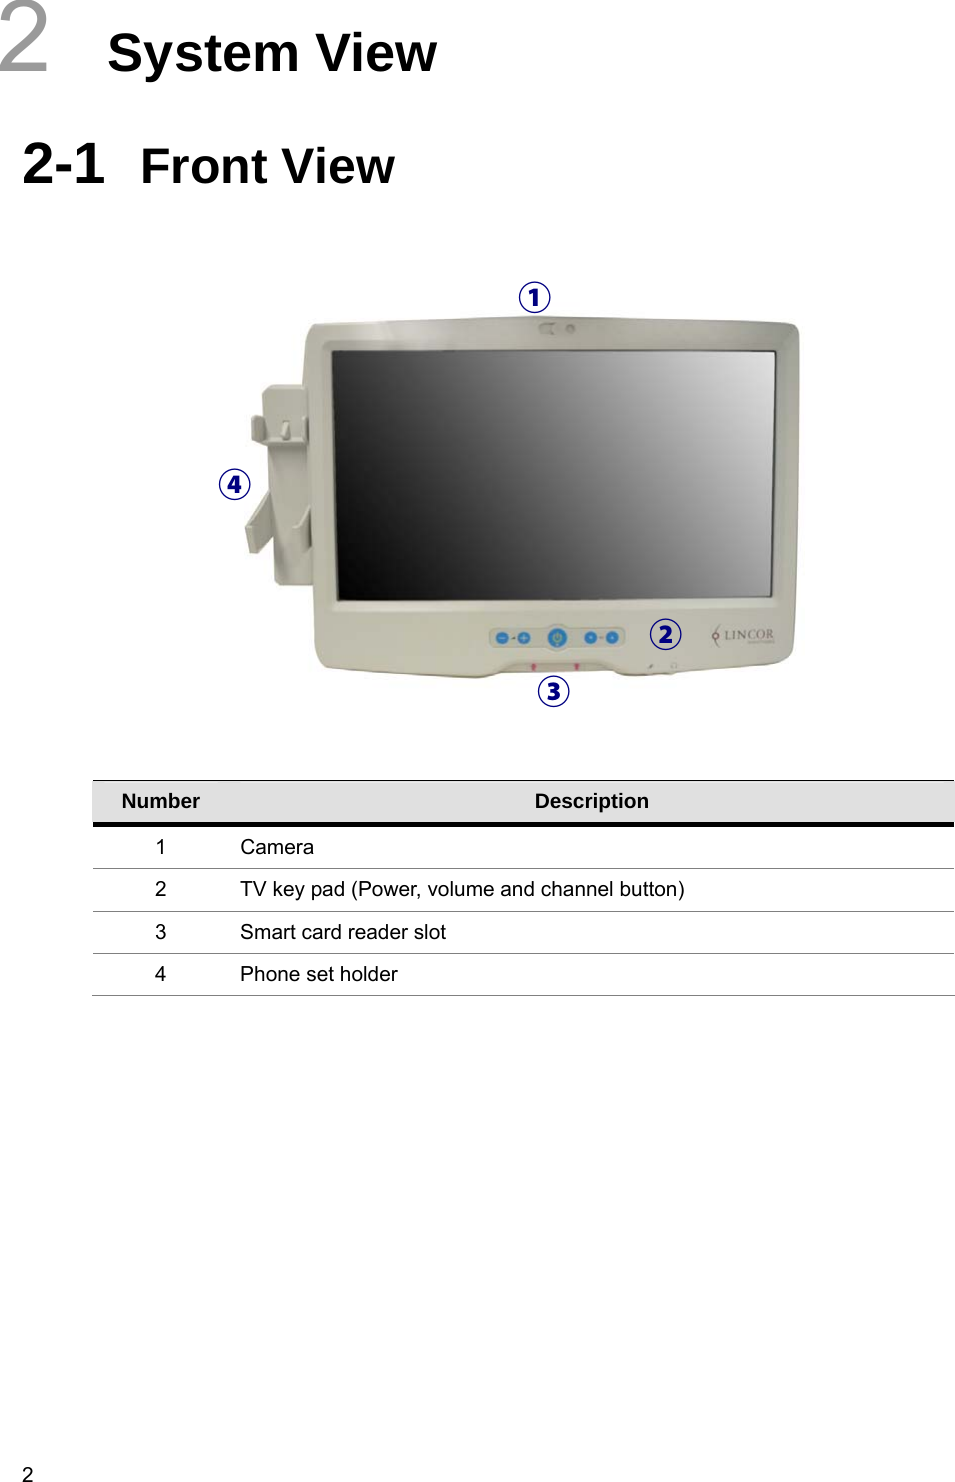  2 2  System View 2-1  Front View      Number  Description 1 Camera 2  TV key pad (Power, volume and channel button) 3  Smart card reader slot 4  Phone set holder  ① ② ③ ④ 